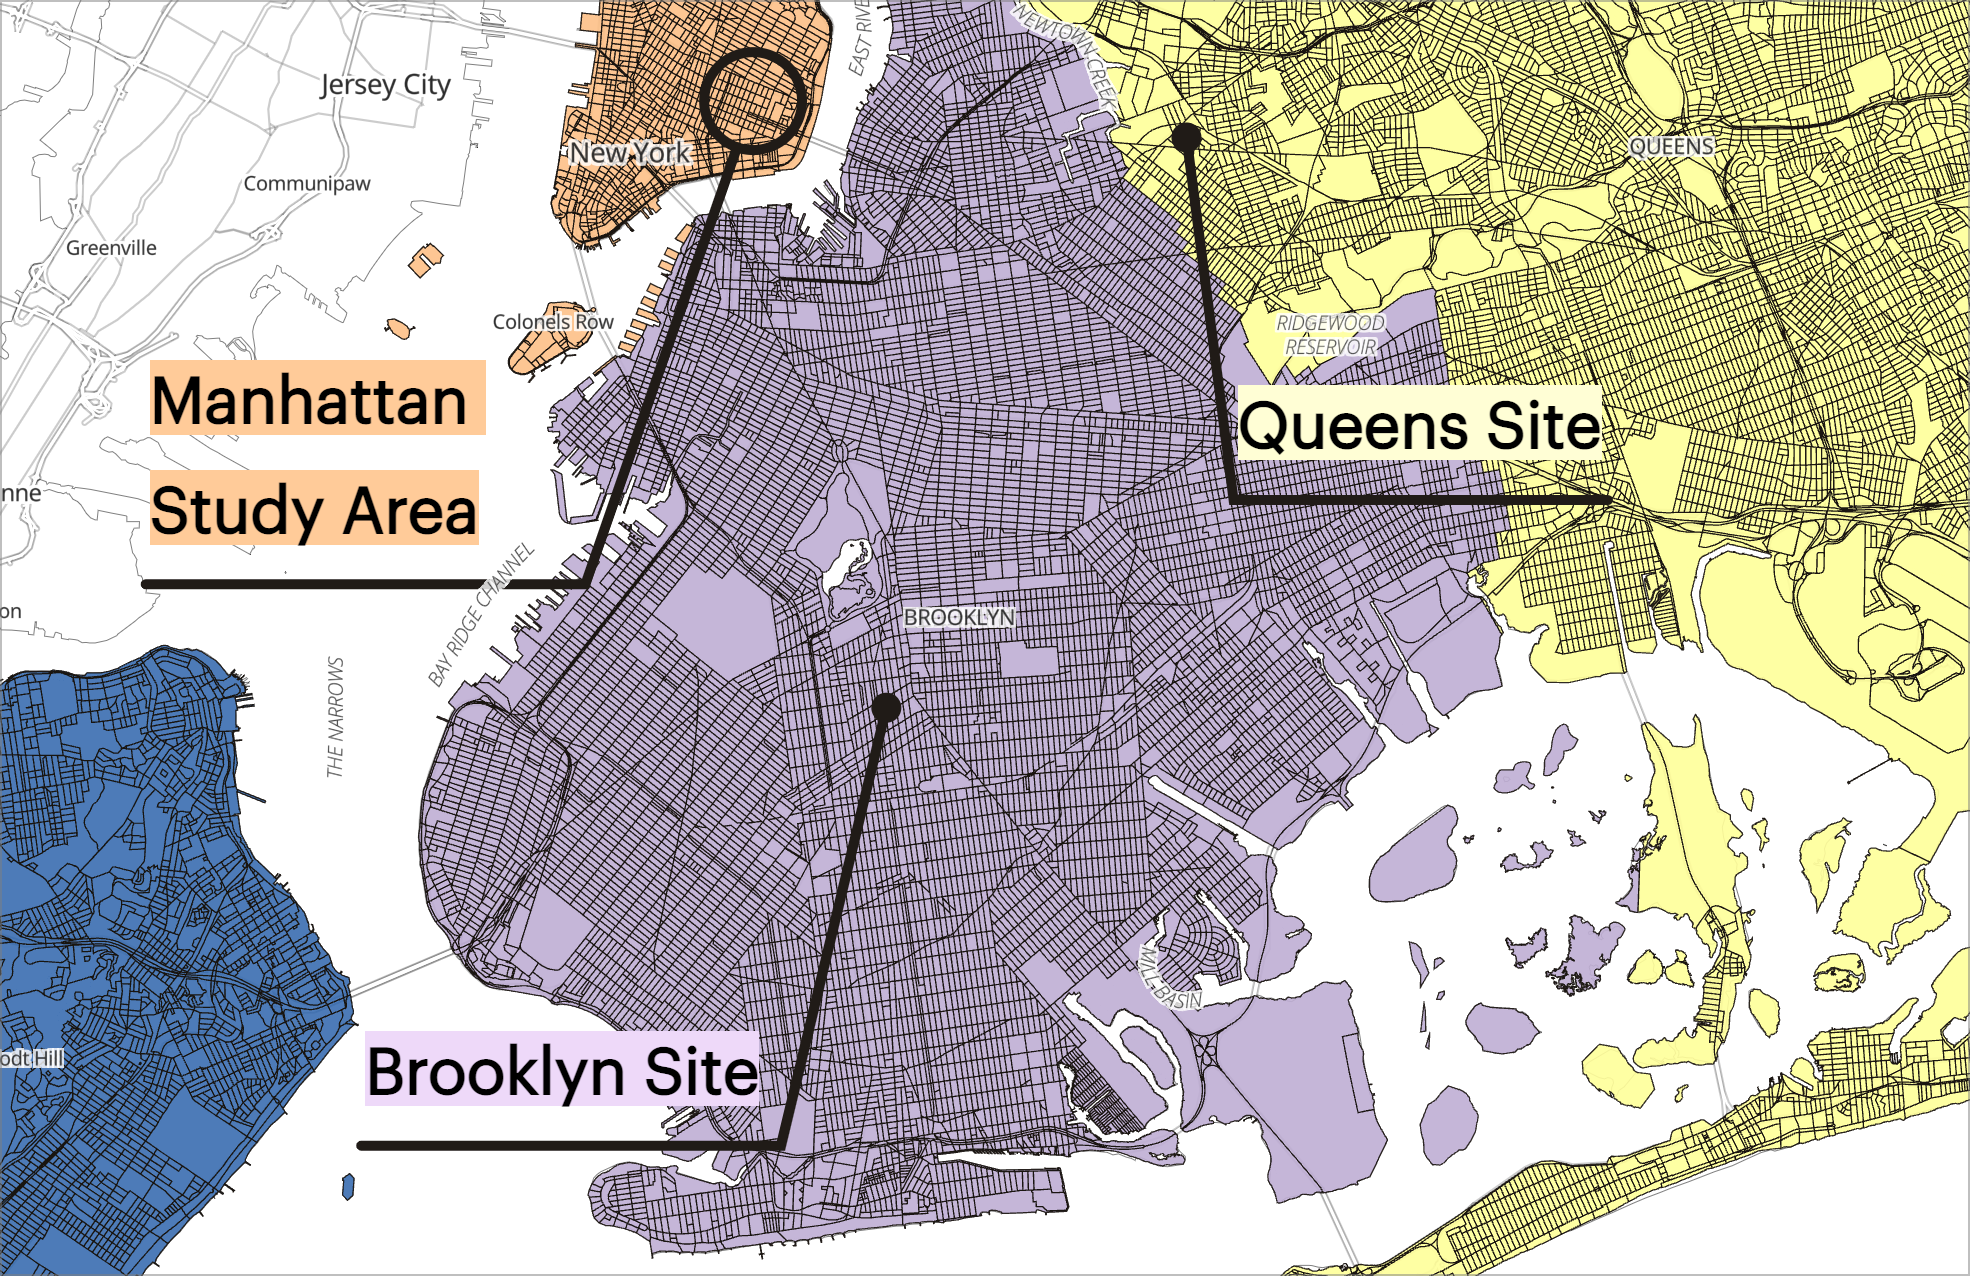 Annotations pointing to locations in New York City.